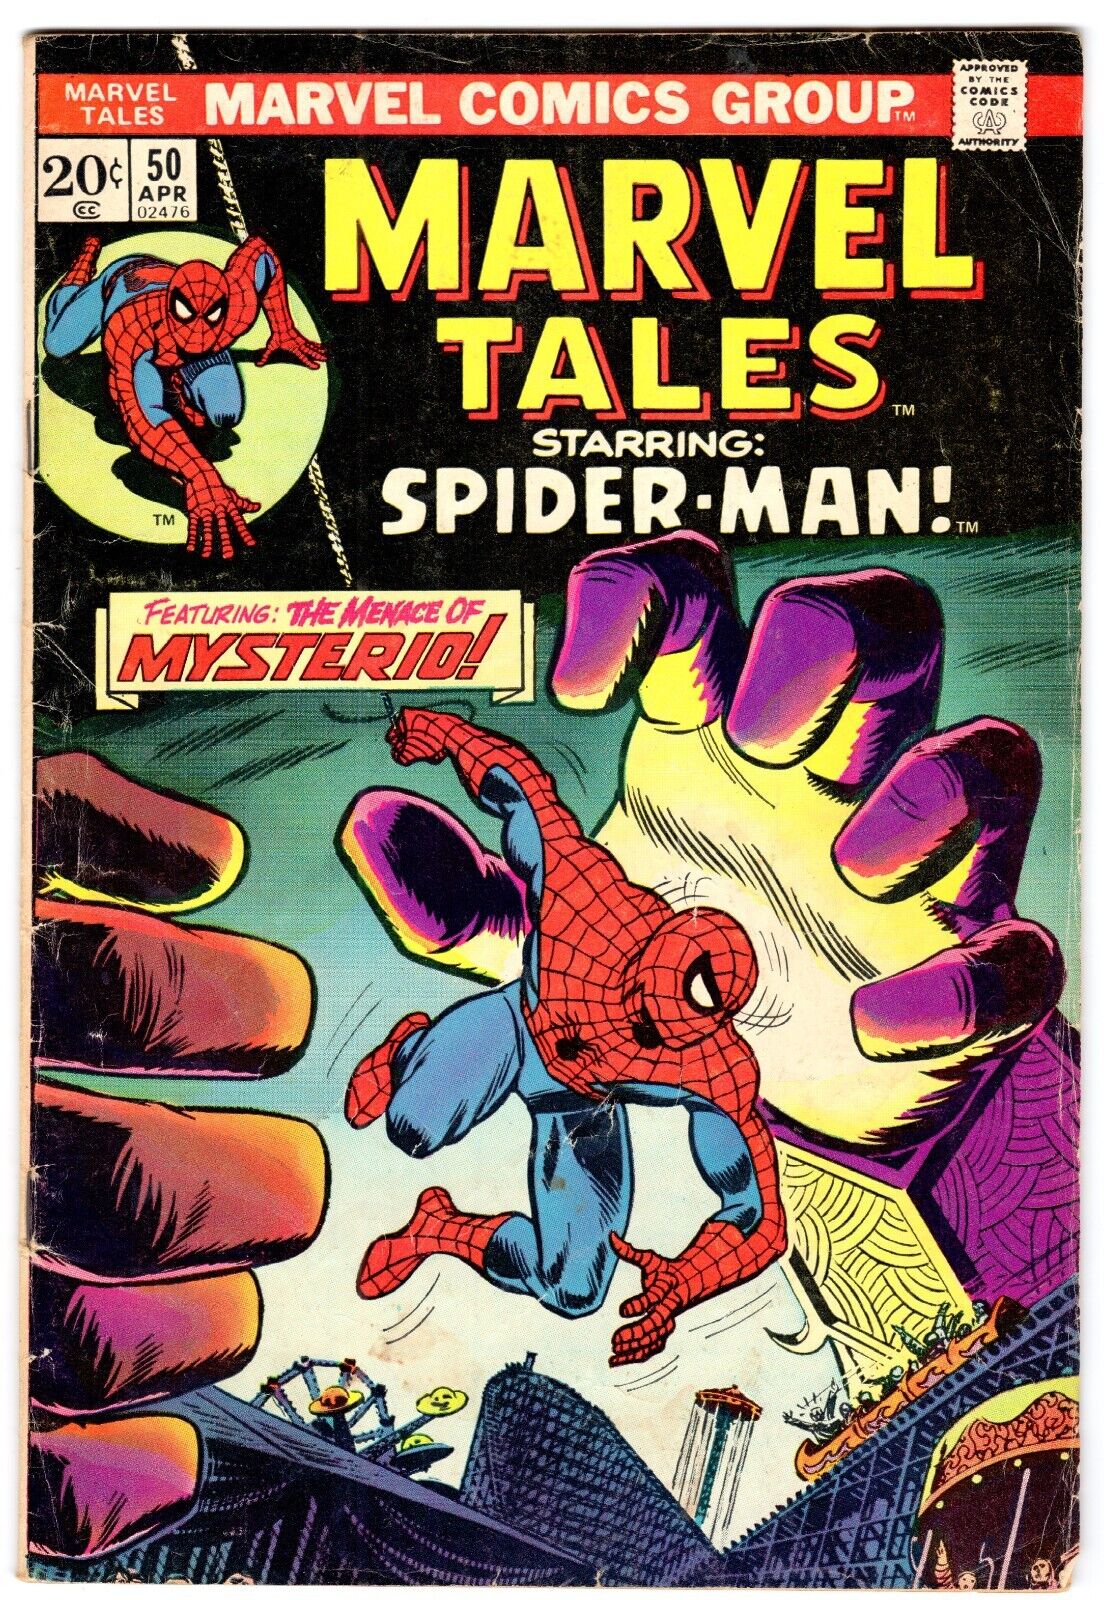 MARVEL TALES #50   Classic MYSTERIO COVER from AMAZING SPIDER-MAN 67  VG+ (4.5)